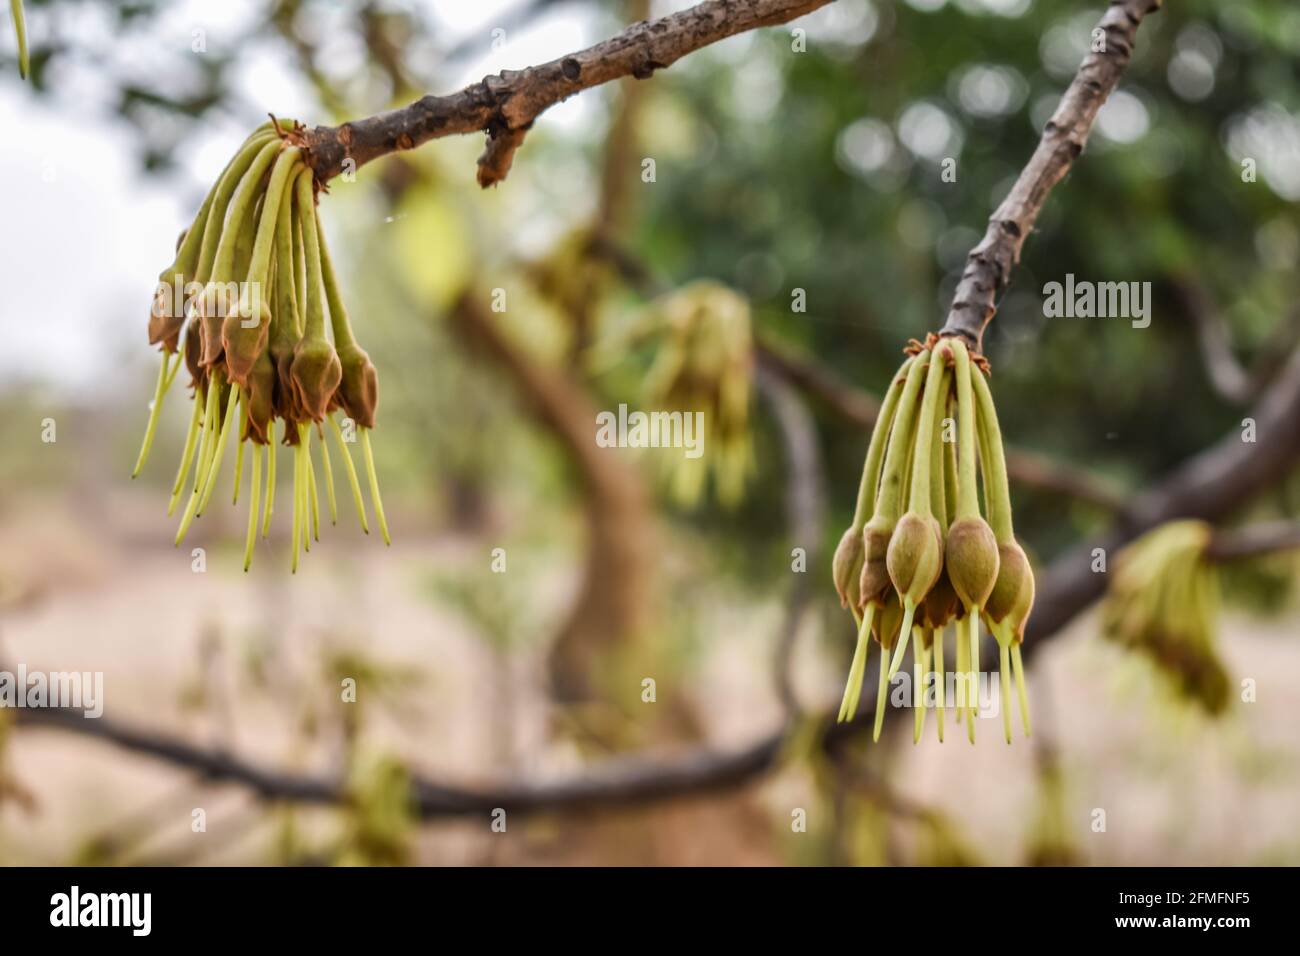 madhuca Longifolia flower bud in the tree branches wild natural foods. Stock Photo